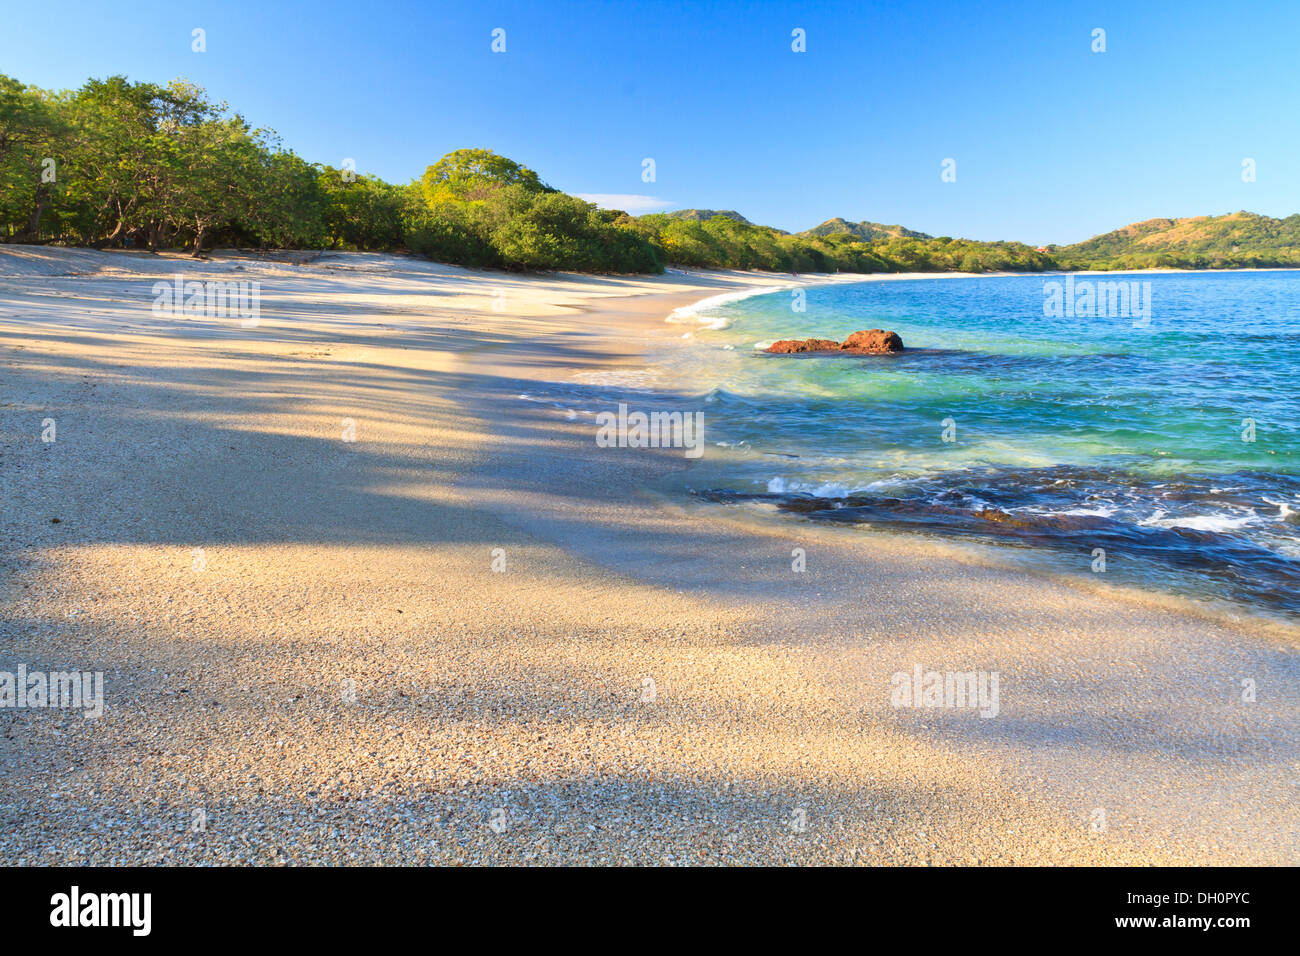 Sand and shells on Playa Conchal and the azure waters of the Pacific Ocean in Guanacaste, Costa RIca Stock Photo